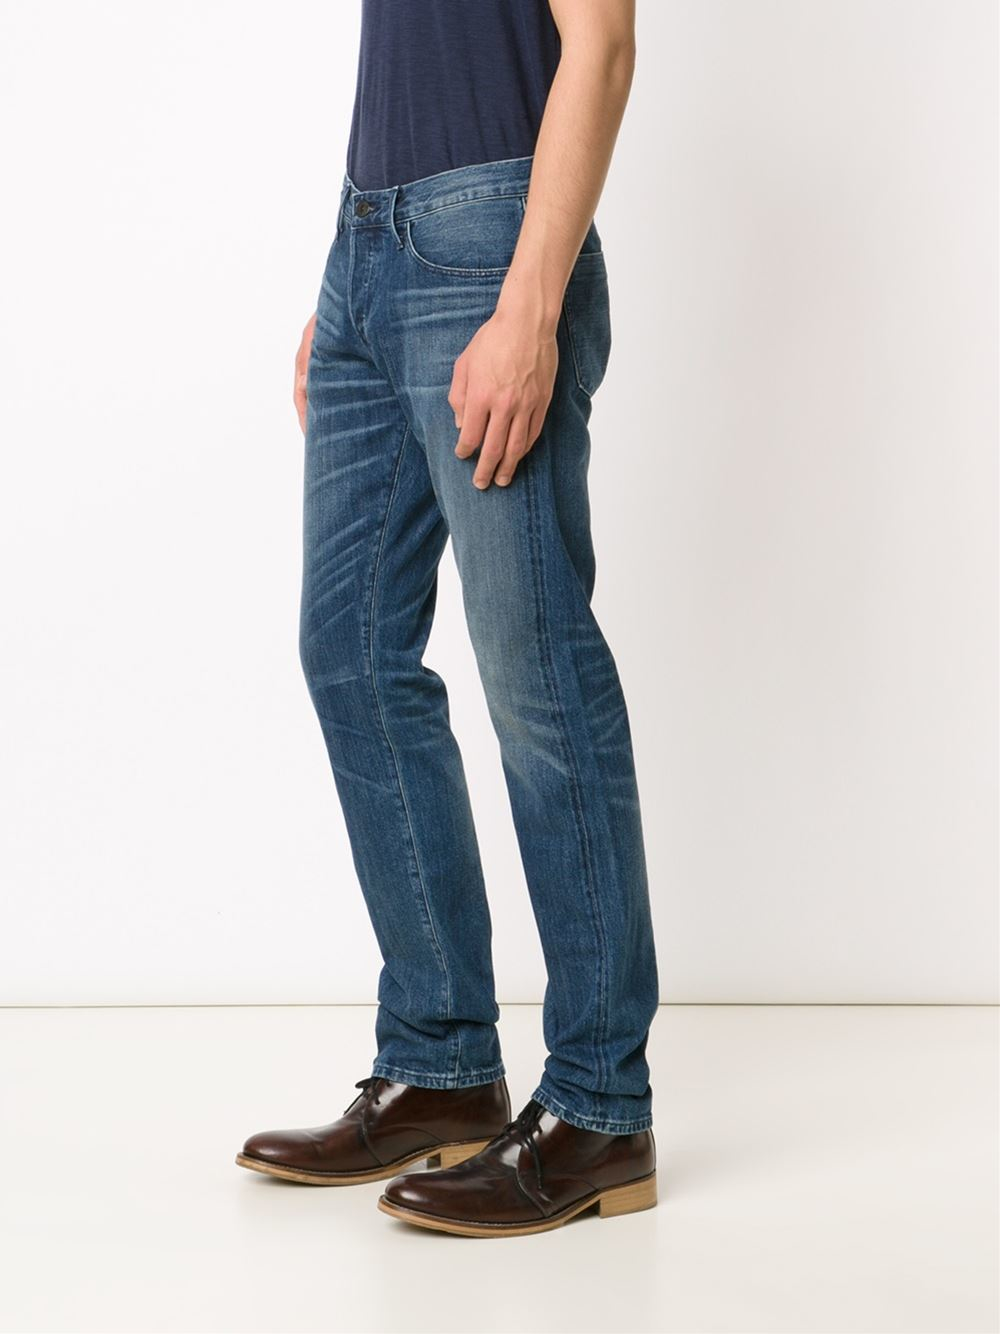 Lyst - 3x1 'm3 Port' Jeans in Blue for Men